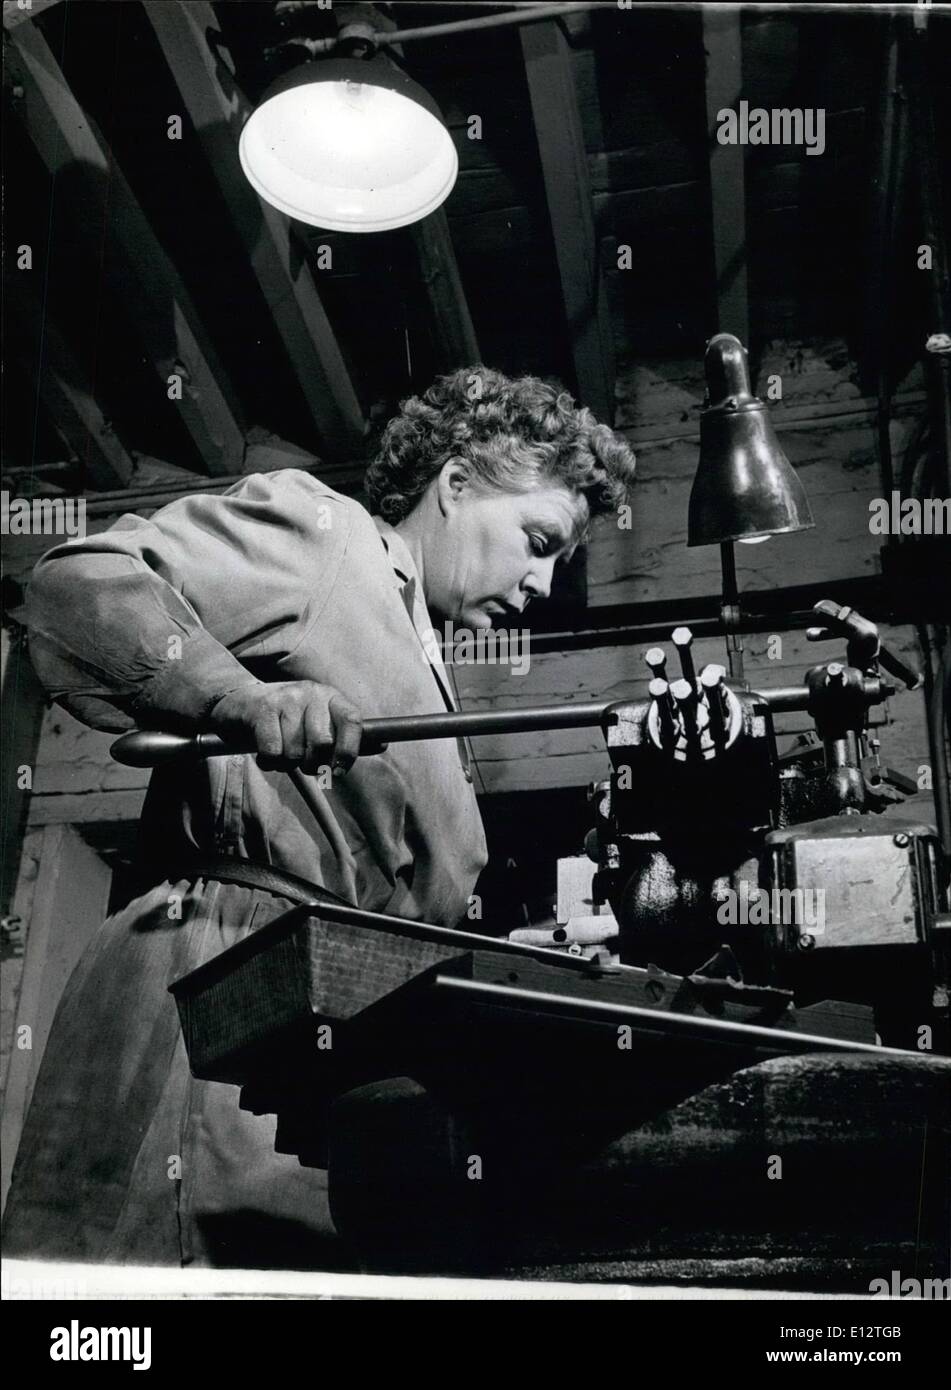 Feb. 25, 2012 - Women As Engineers: Miss Farris Is An Expert With A Lathe: Miss Farris, having fixed the jigs herself, now operates a centre lathe in the Gillingham factory which is run and staffed entirely by women engineers. Stock Photo